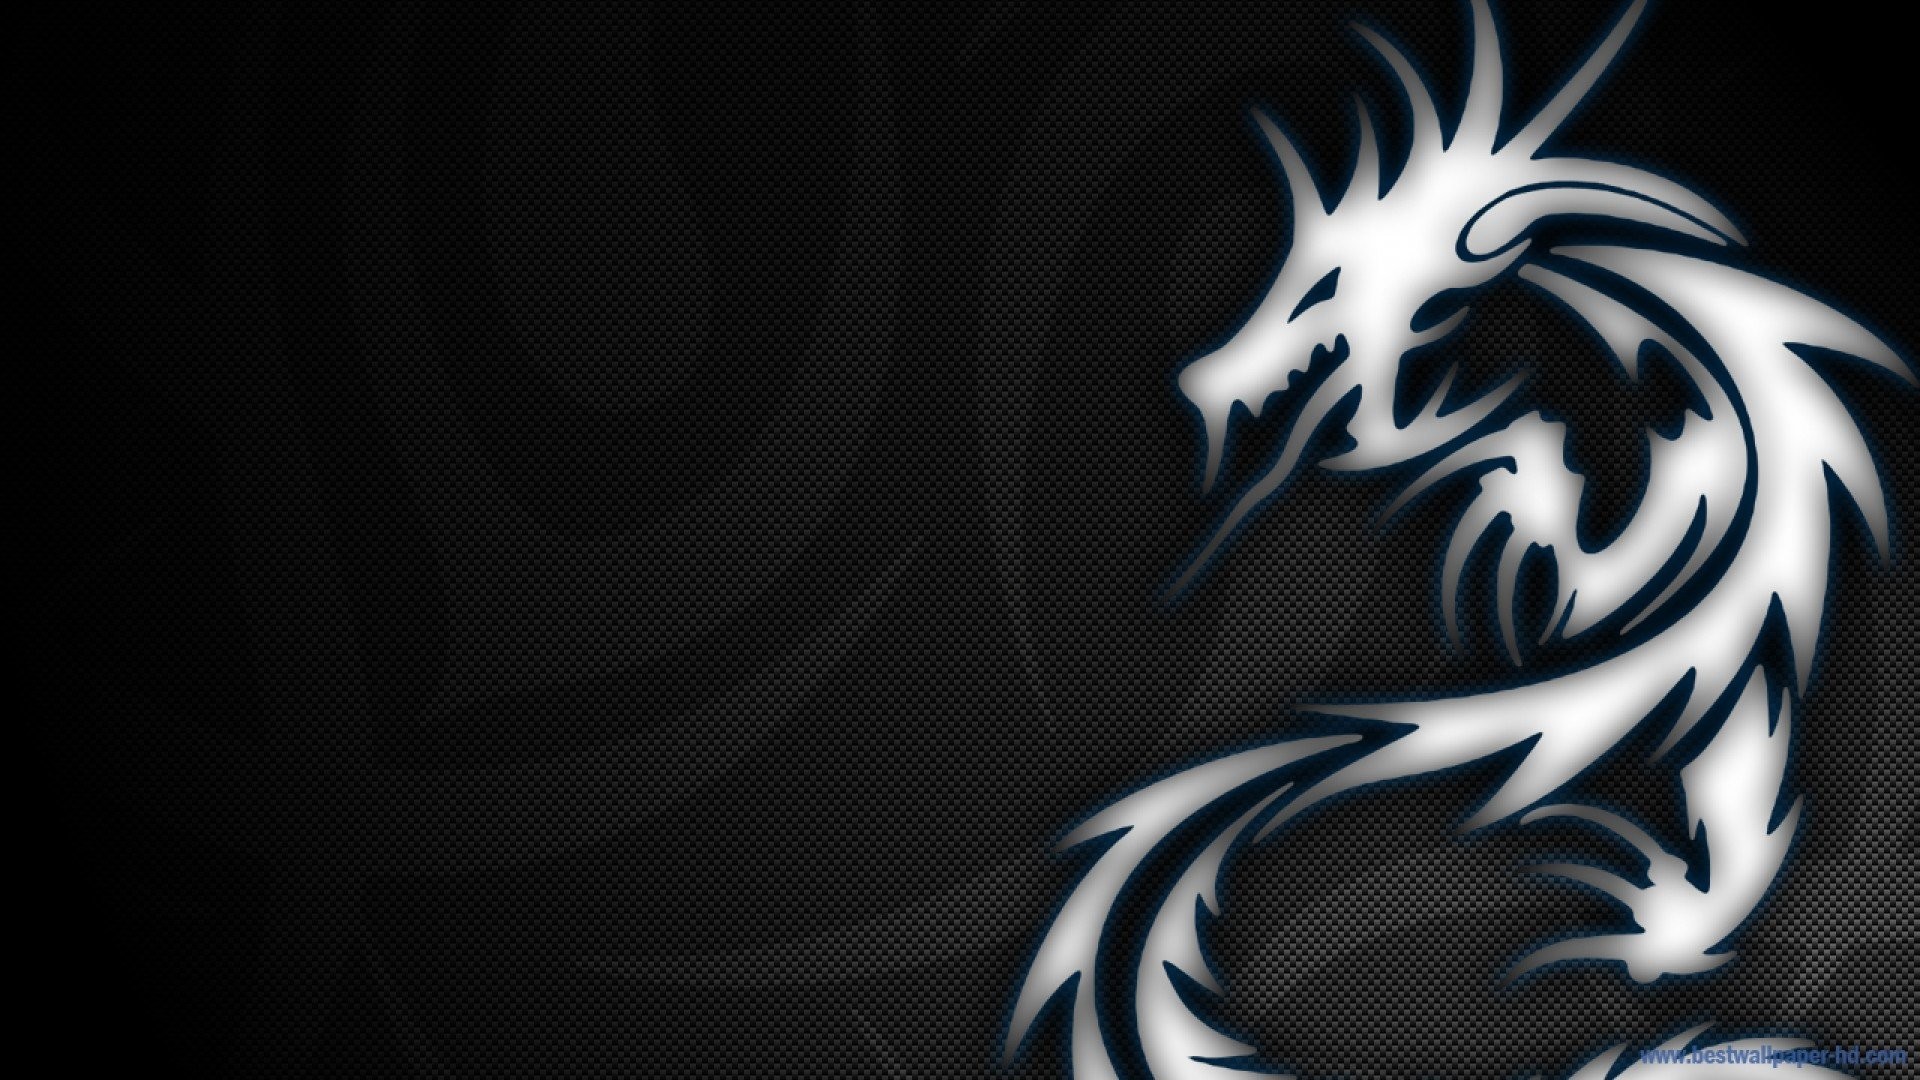 1920x1080 Abstract Dragon wallpaper background 